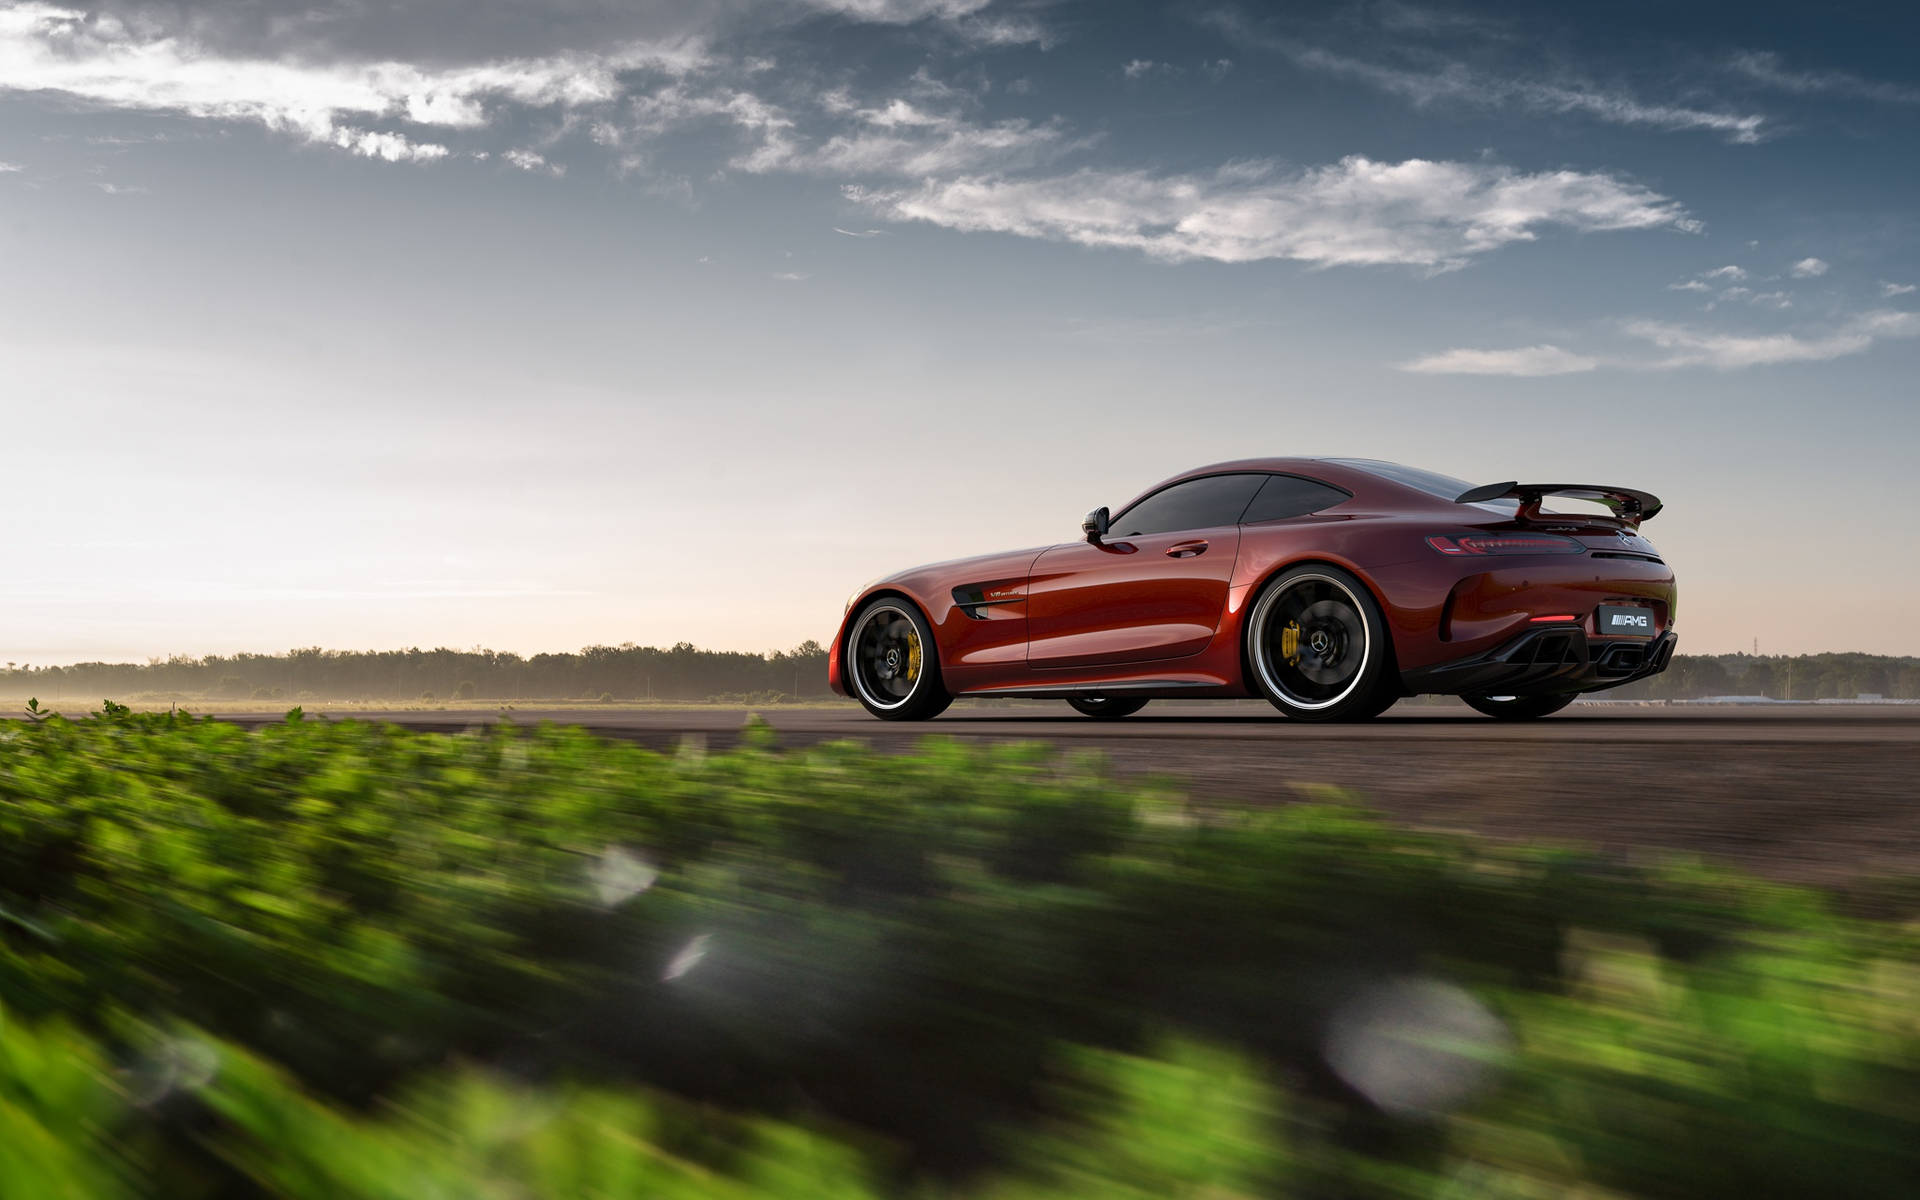 The Unstoppable Power - Amg Gtr On Grass Road Background